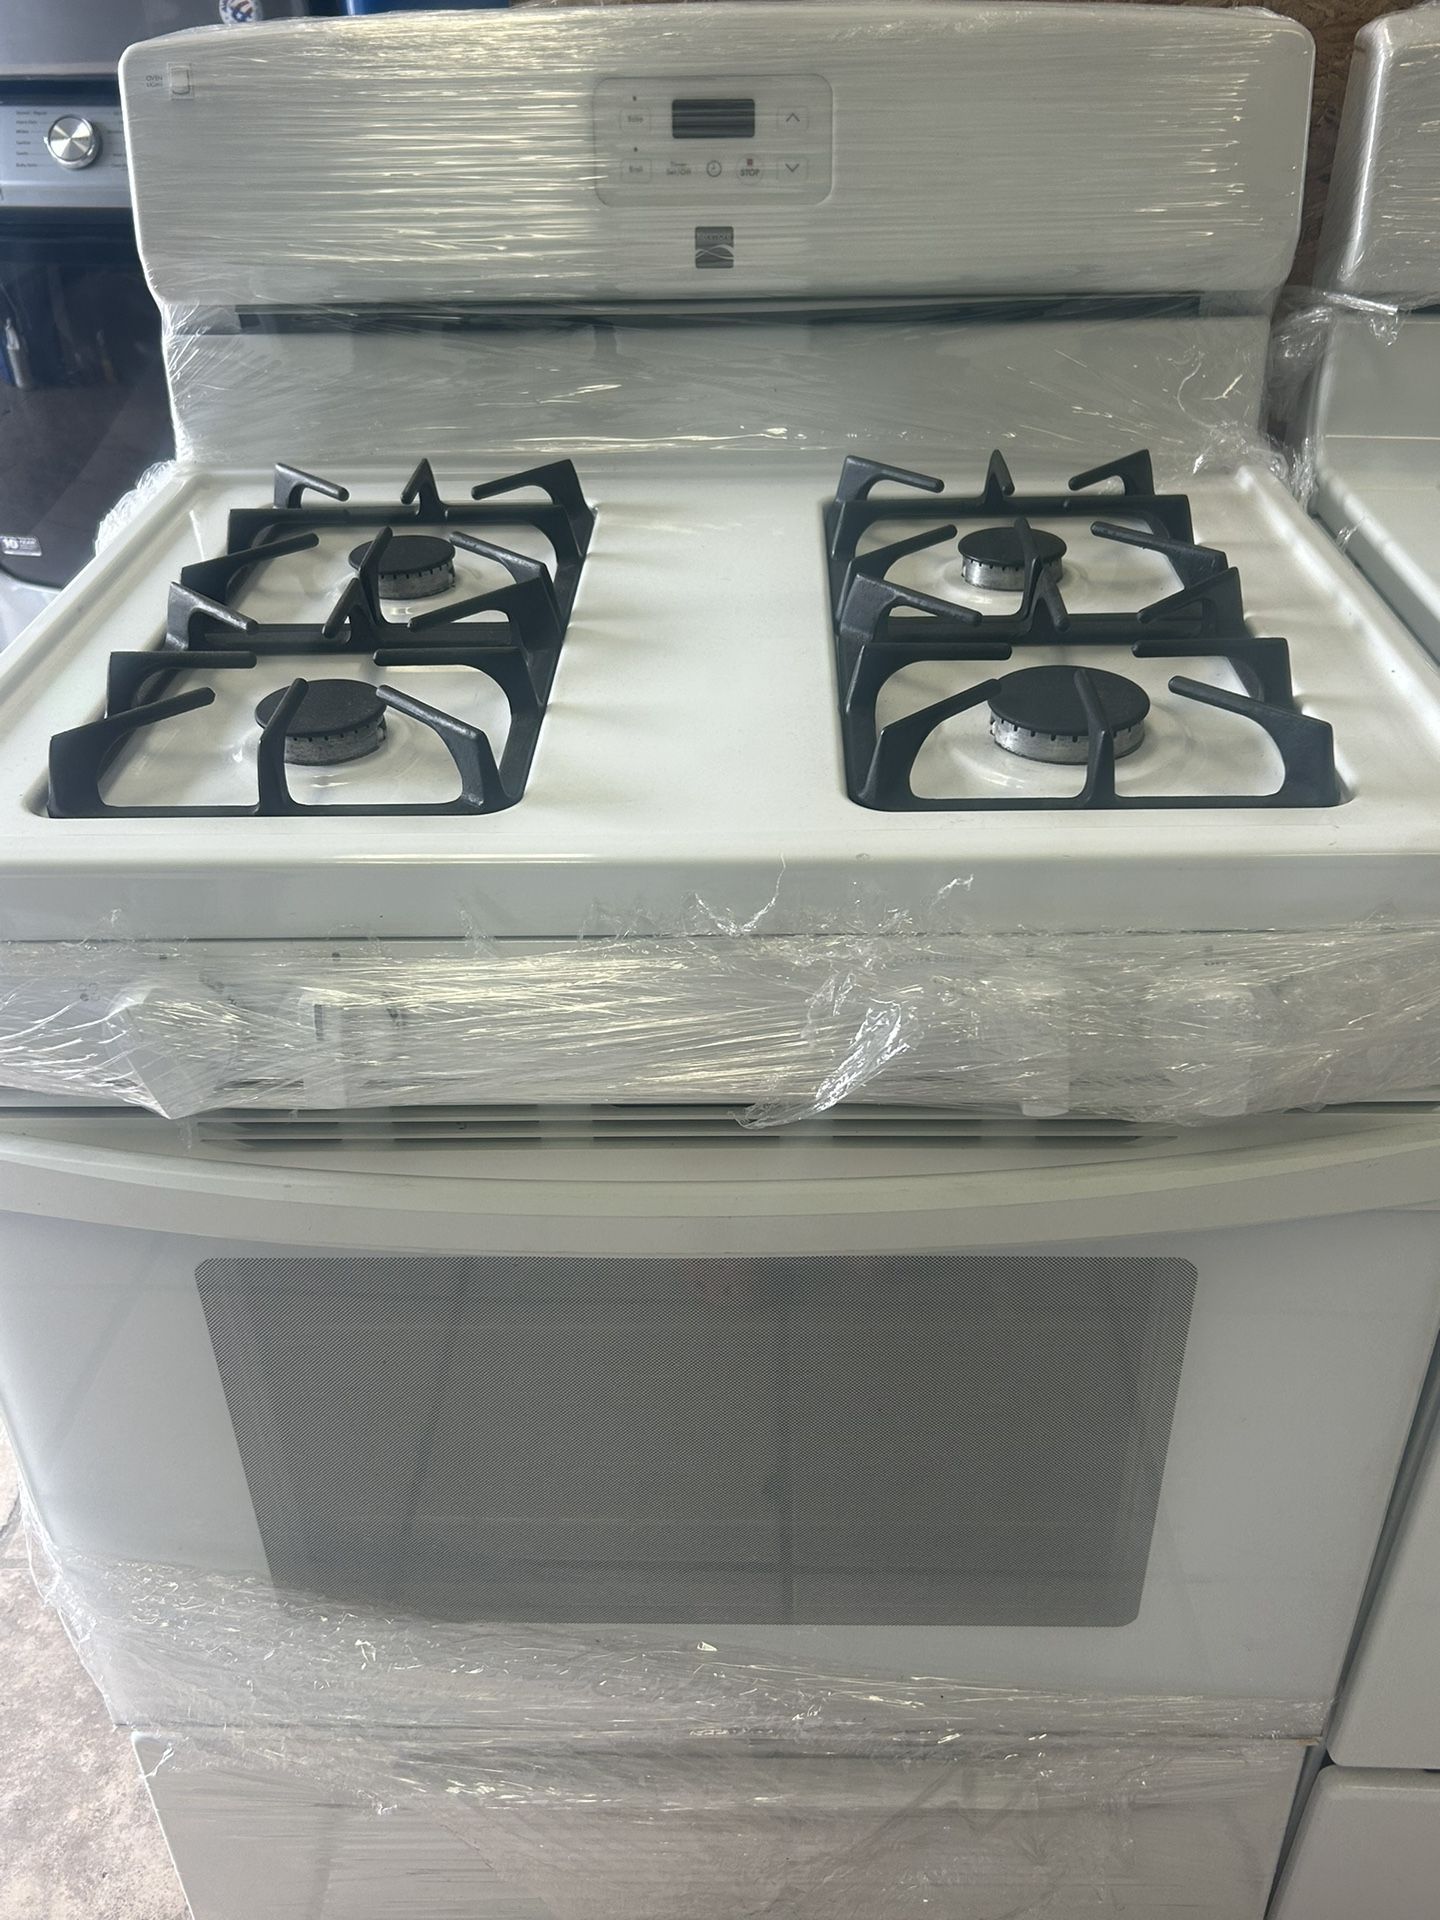 Kenmore Stove (delivery+install Available) Width 30”